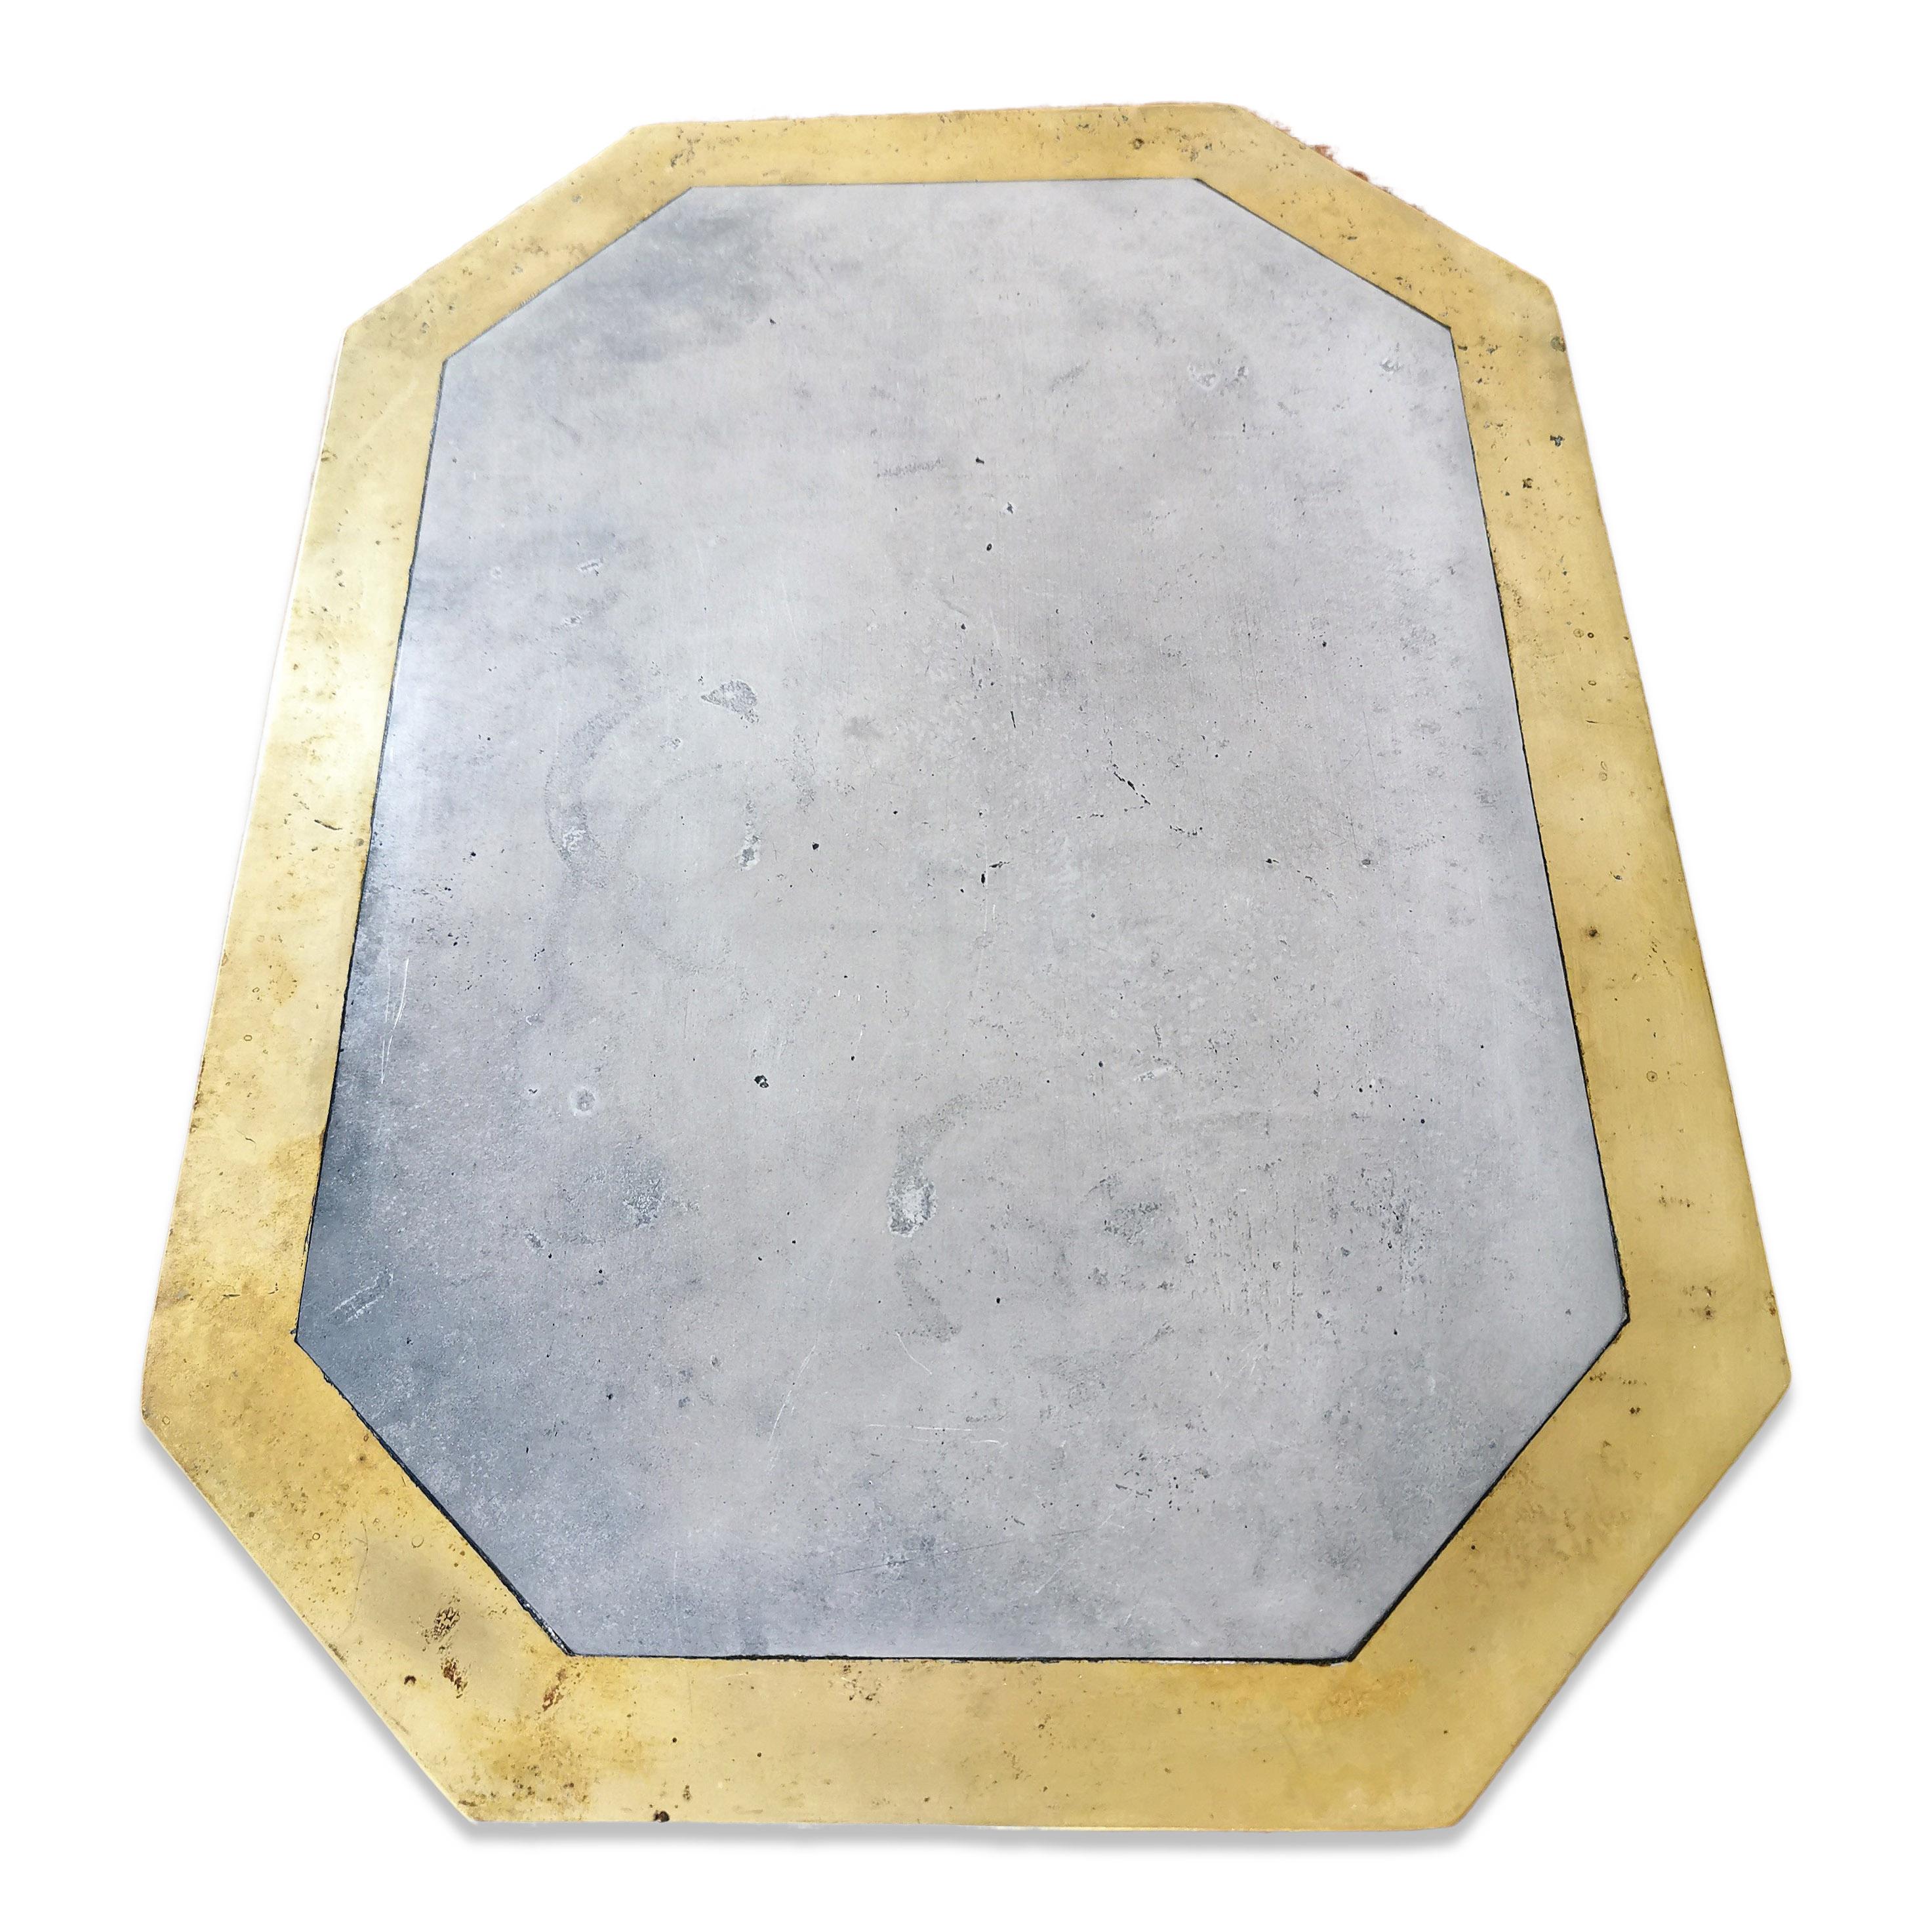 Scottish artist David Marshall rarest production
Minimalist and Brutalist table mats, plates
solid aluminum and bronze 
patinated
Suede on the flipside
these plates will ship out of Paris, France
price does not include shipping nor possible